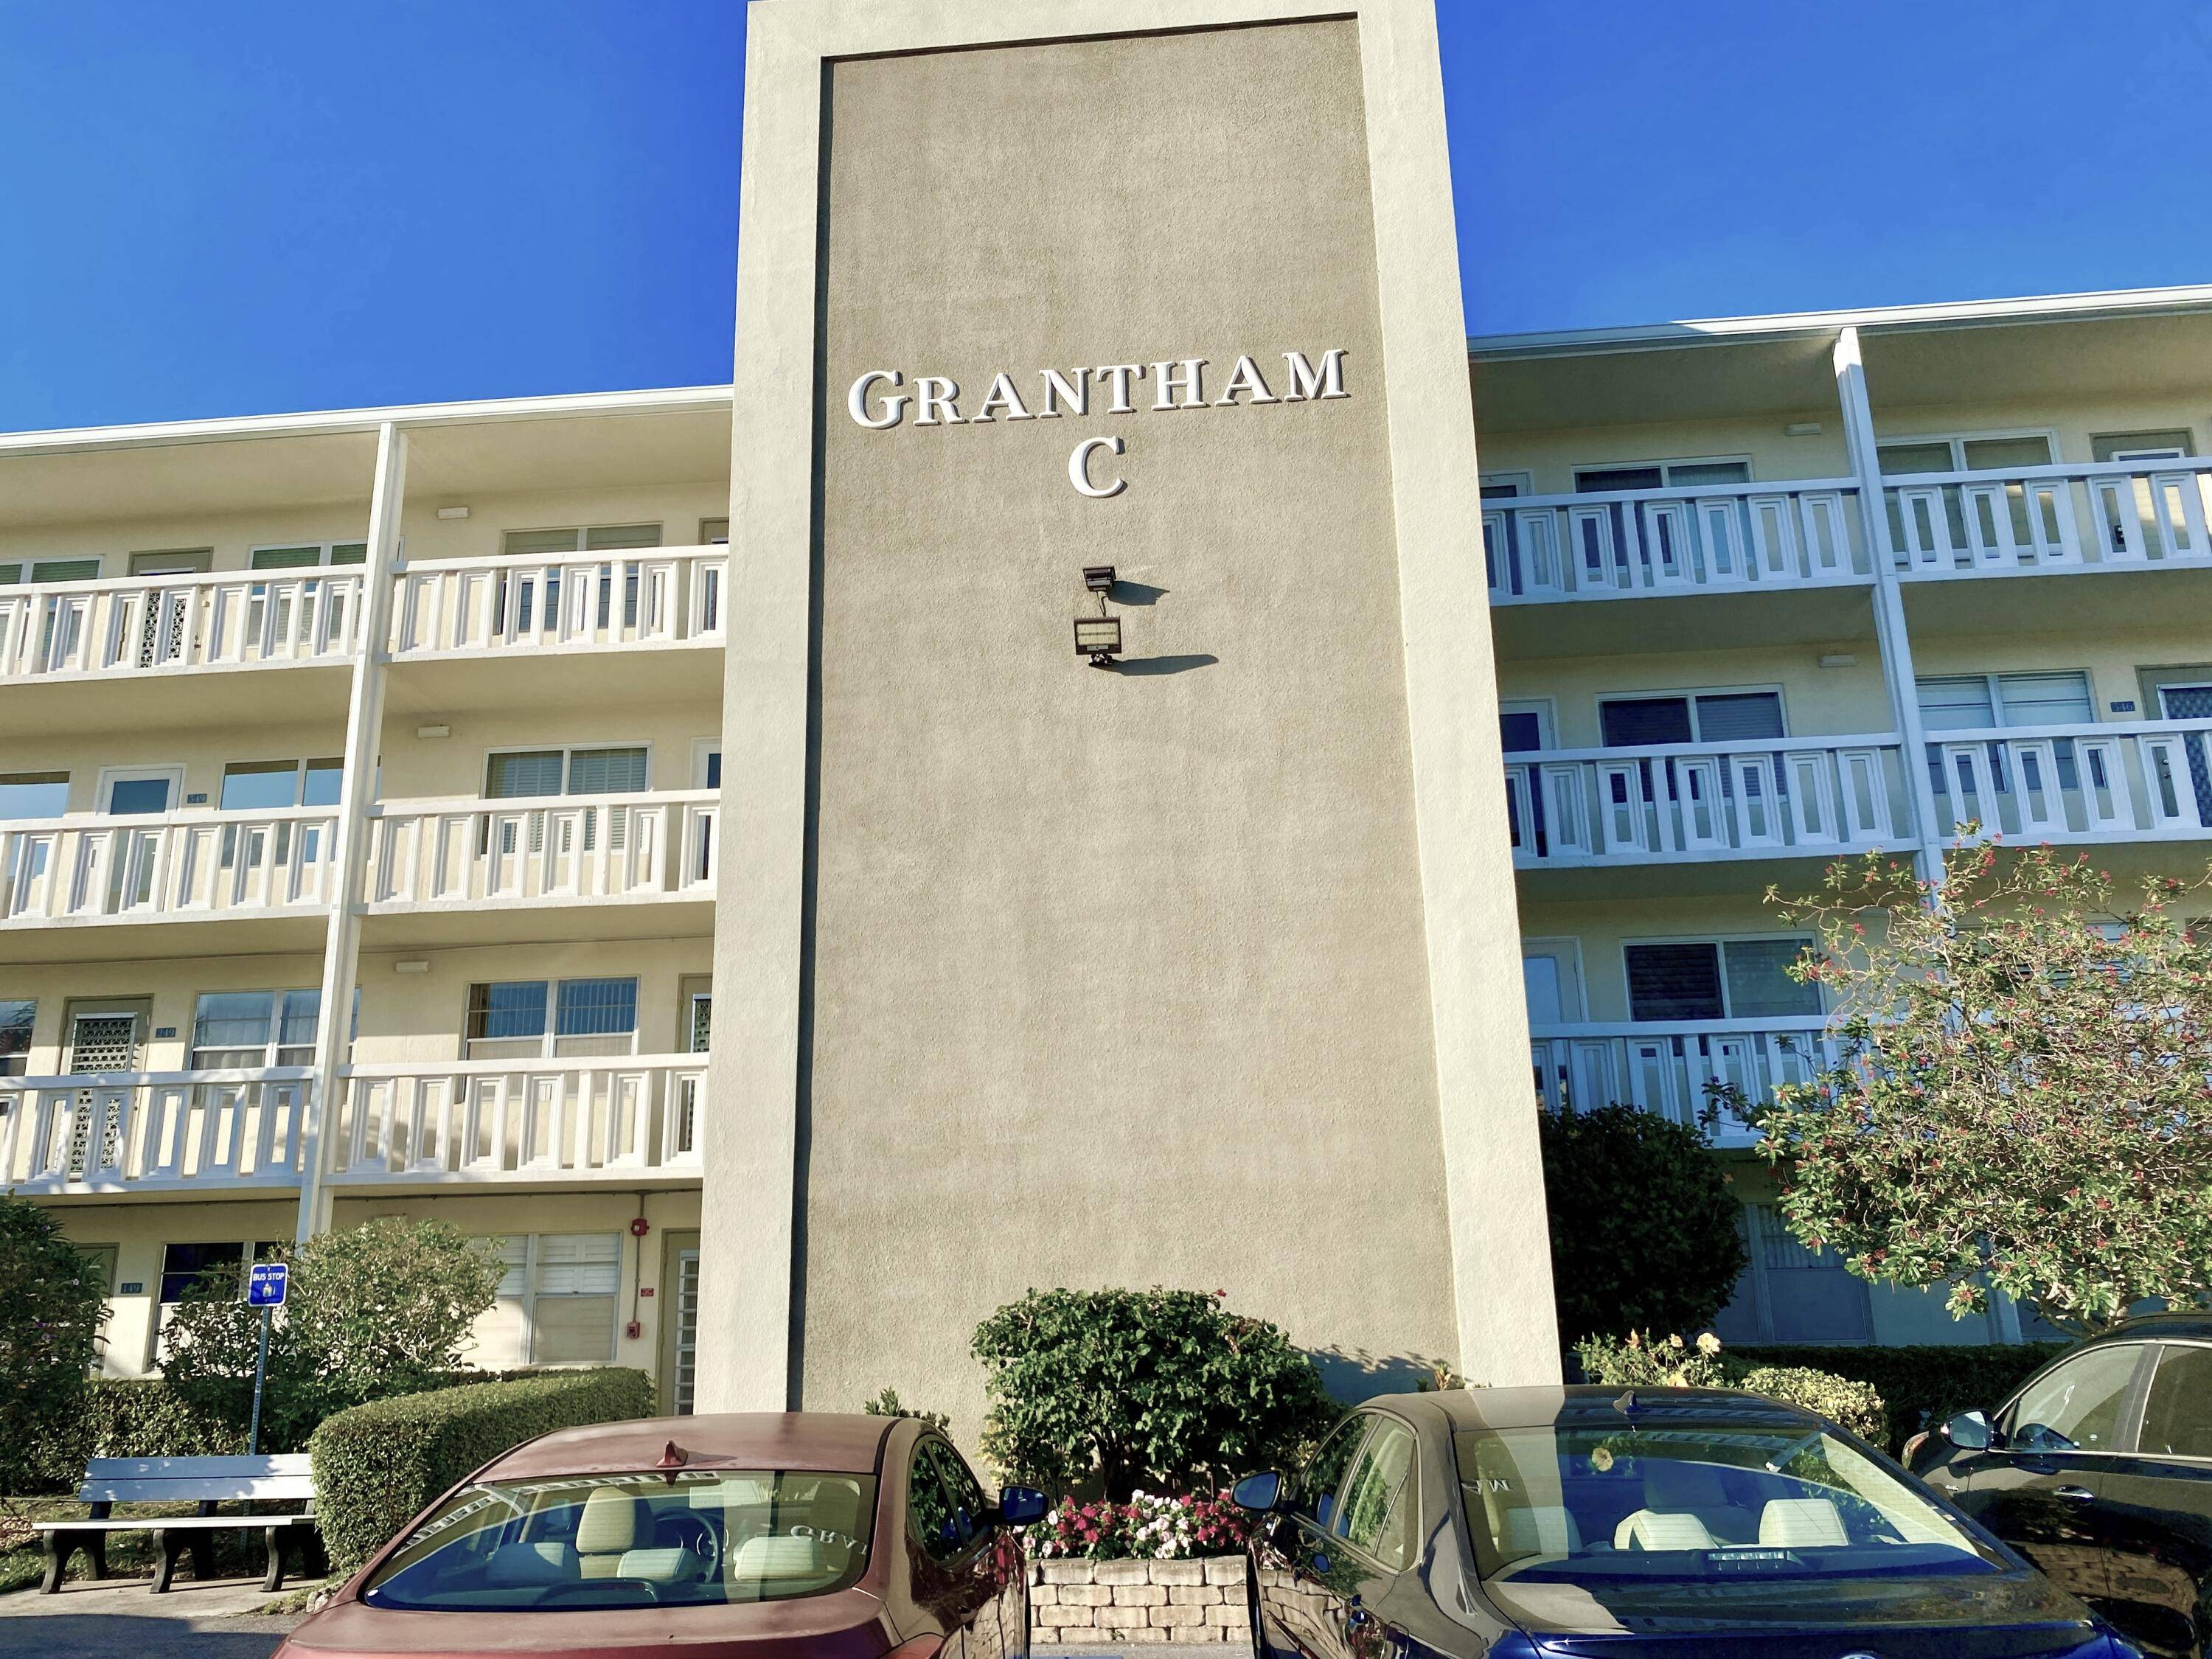 HIGHLY DESIRABLE Grantham Location, Furnished 2nd Floor 2 Bedroom, 2 Baths 1000 SF condo.